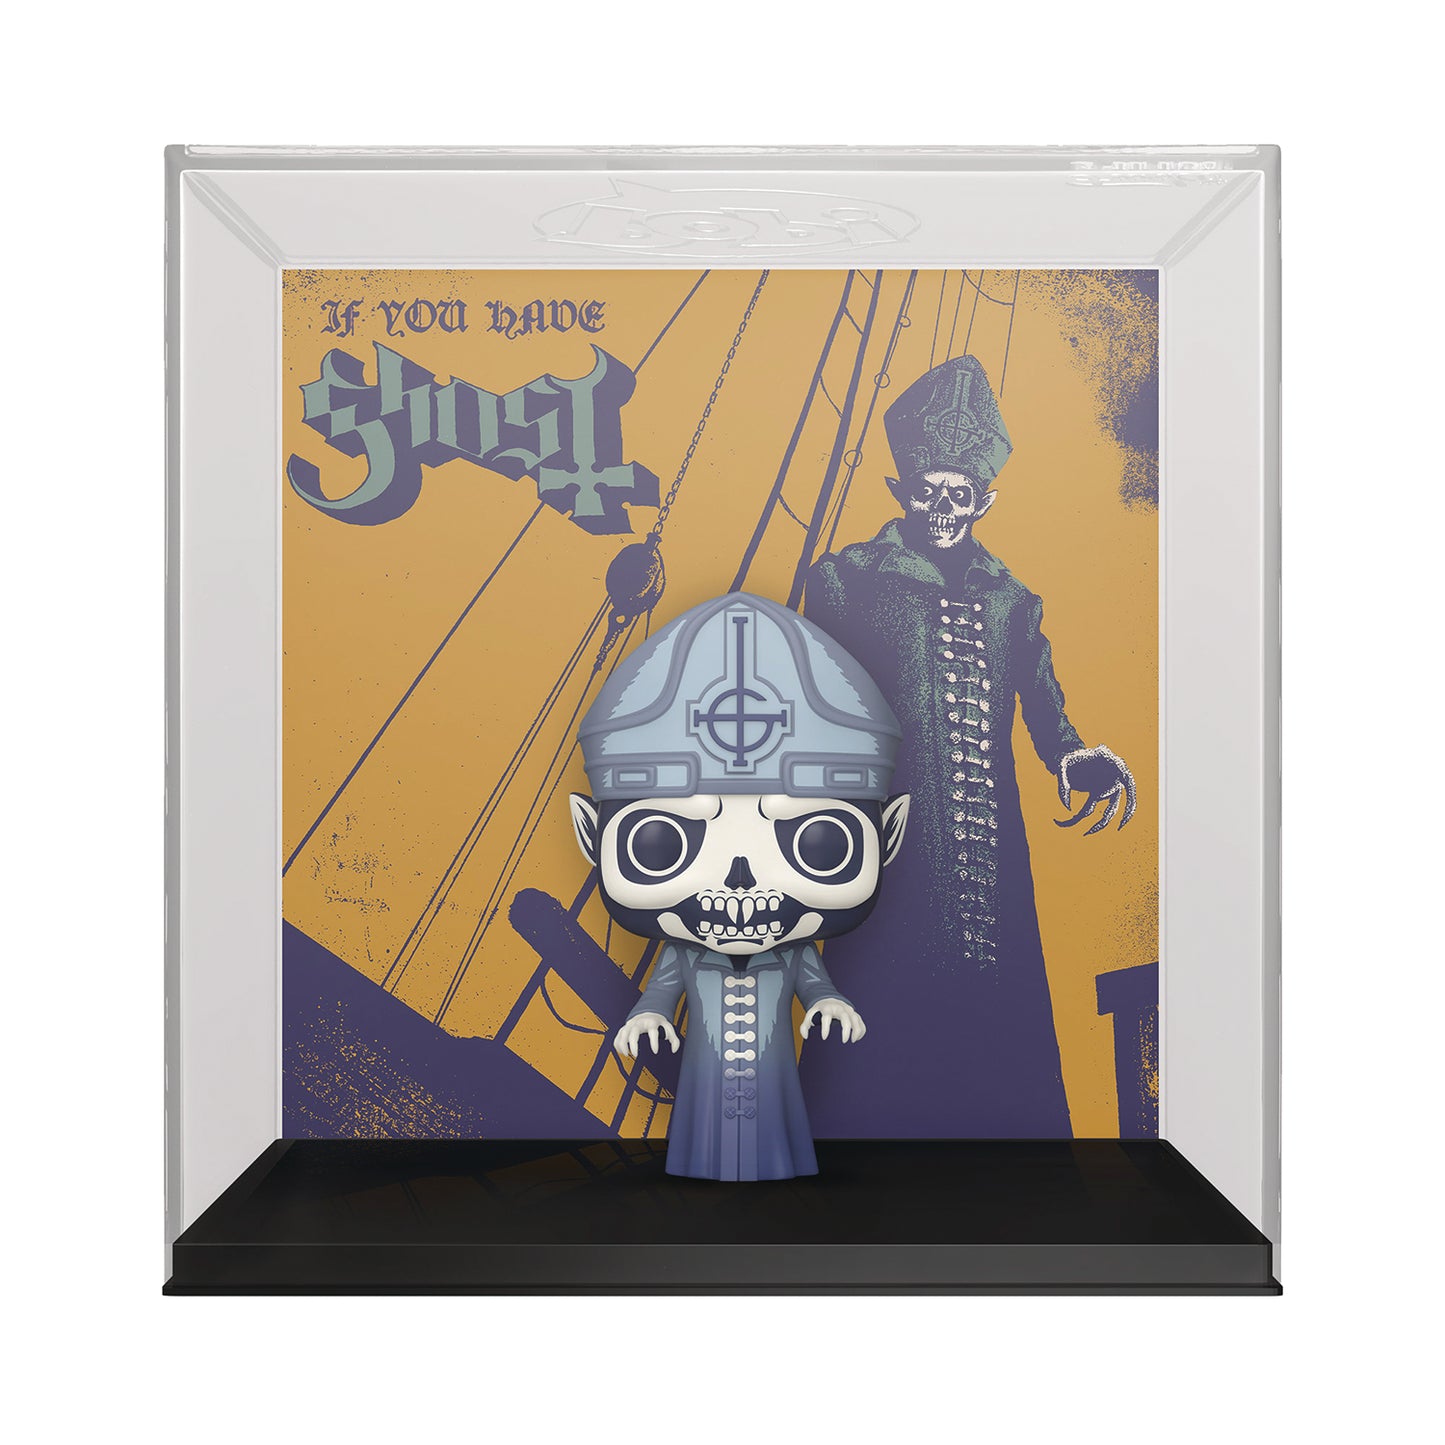 Funko Albums Pop!: Ghost - If You Have Ghost #63